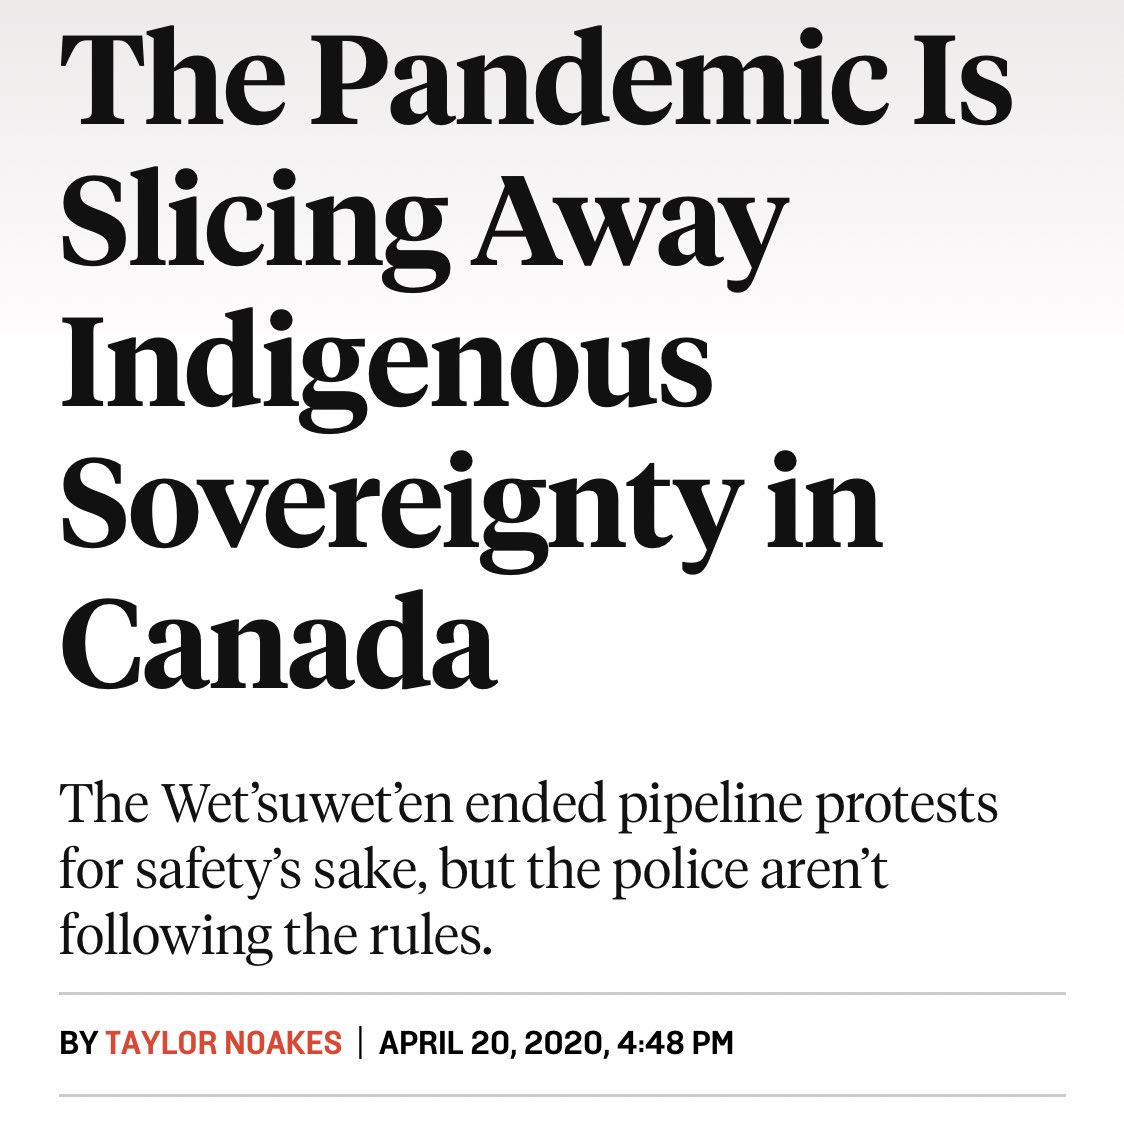 even though the protests have stopped for safety measures, the police r not stopping their presence in indigenous communities, n the pipeline is STILL being built.  https://foreignpolicy.com/2020/04/20/gas-pipeline-wetsuweten-coronavirus-pandemic-indigenous-sovereignty-canada-oil/